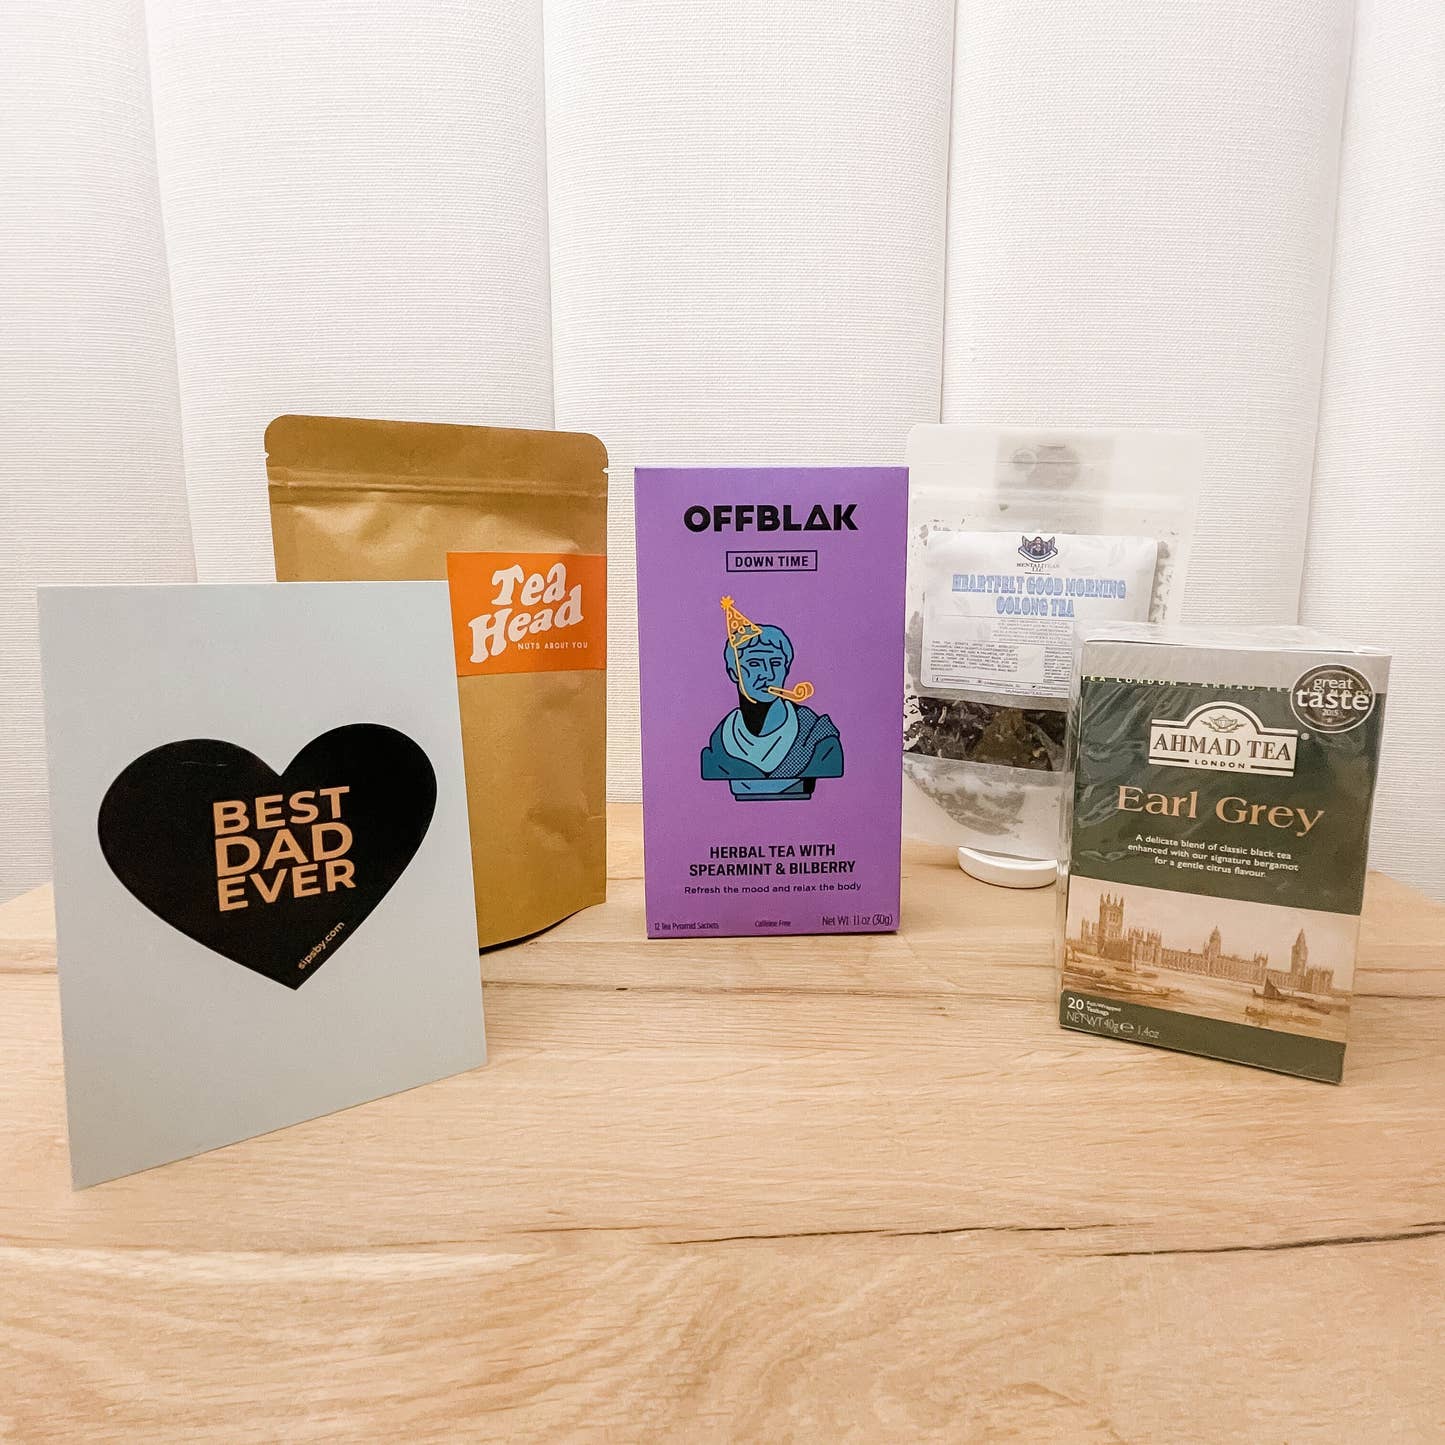 Four full-sized tea packages from OFFBLAK, Tea Head, Mentaliteas, and Ahmad Tea for the Father's Day Tea Care Package and a Sips by "Best Dad Ever" blue postcard with a heart